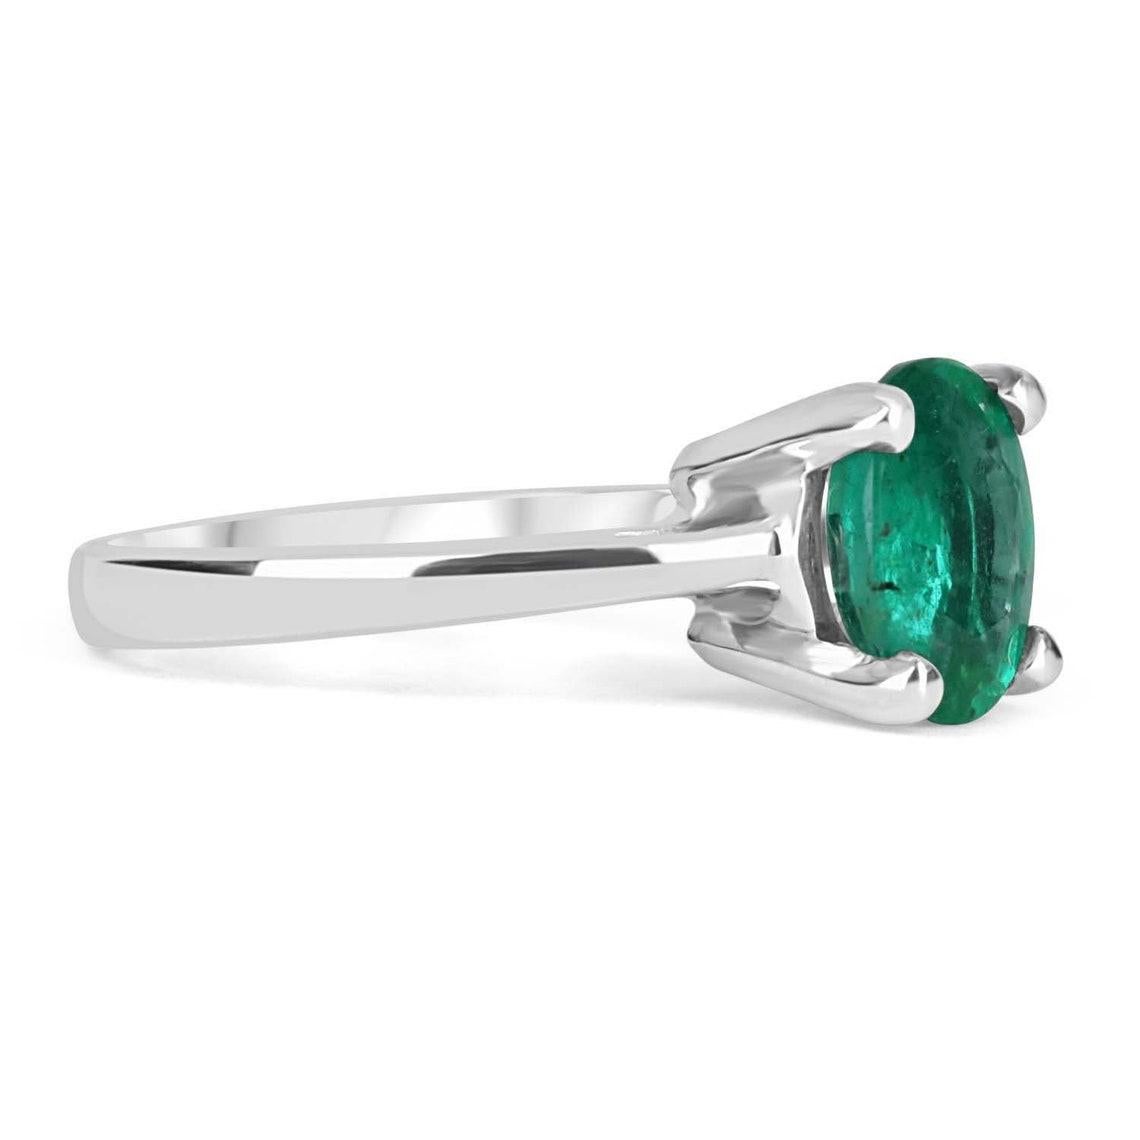 Displayed is a custom emerald solitaire oval-cut engagement/right-hand ring in 14K white gold. This gorgeous solitaire ring carries a 1.77-carat emerald in a four-prong setting. The emerald has very good clarity with minor flaws that are normal in